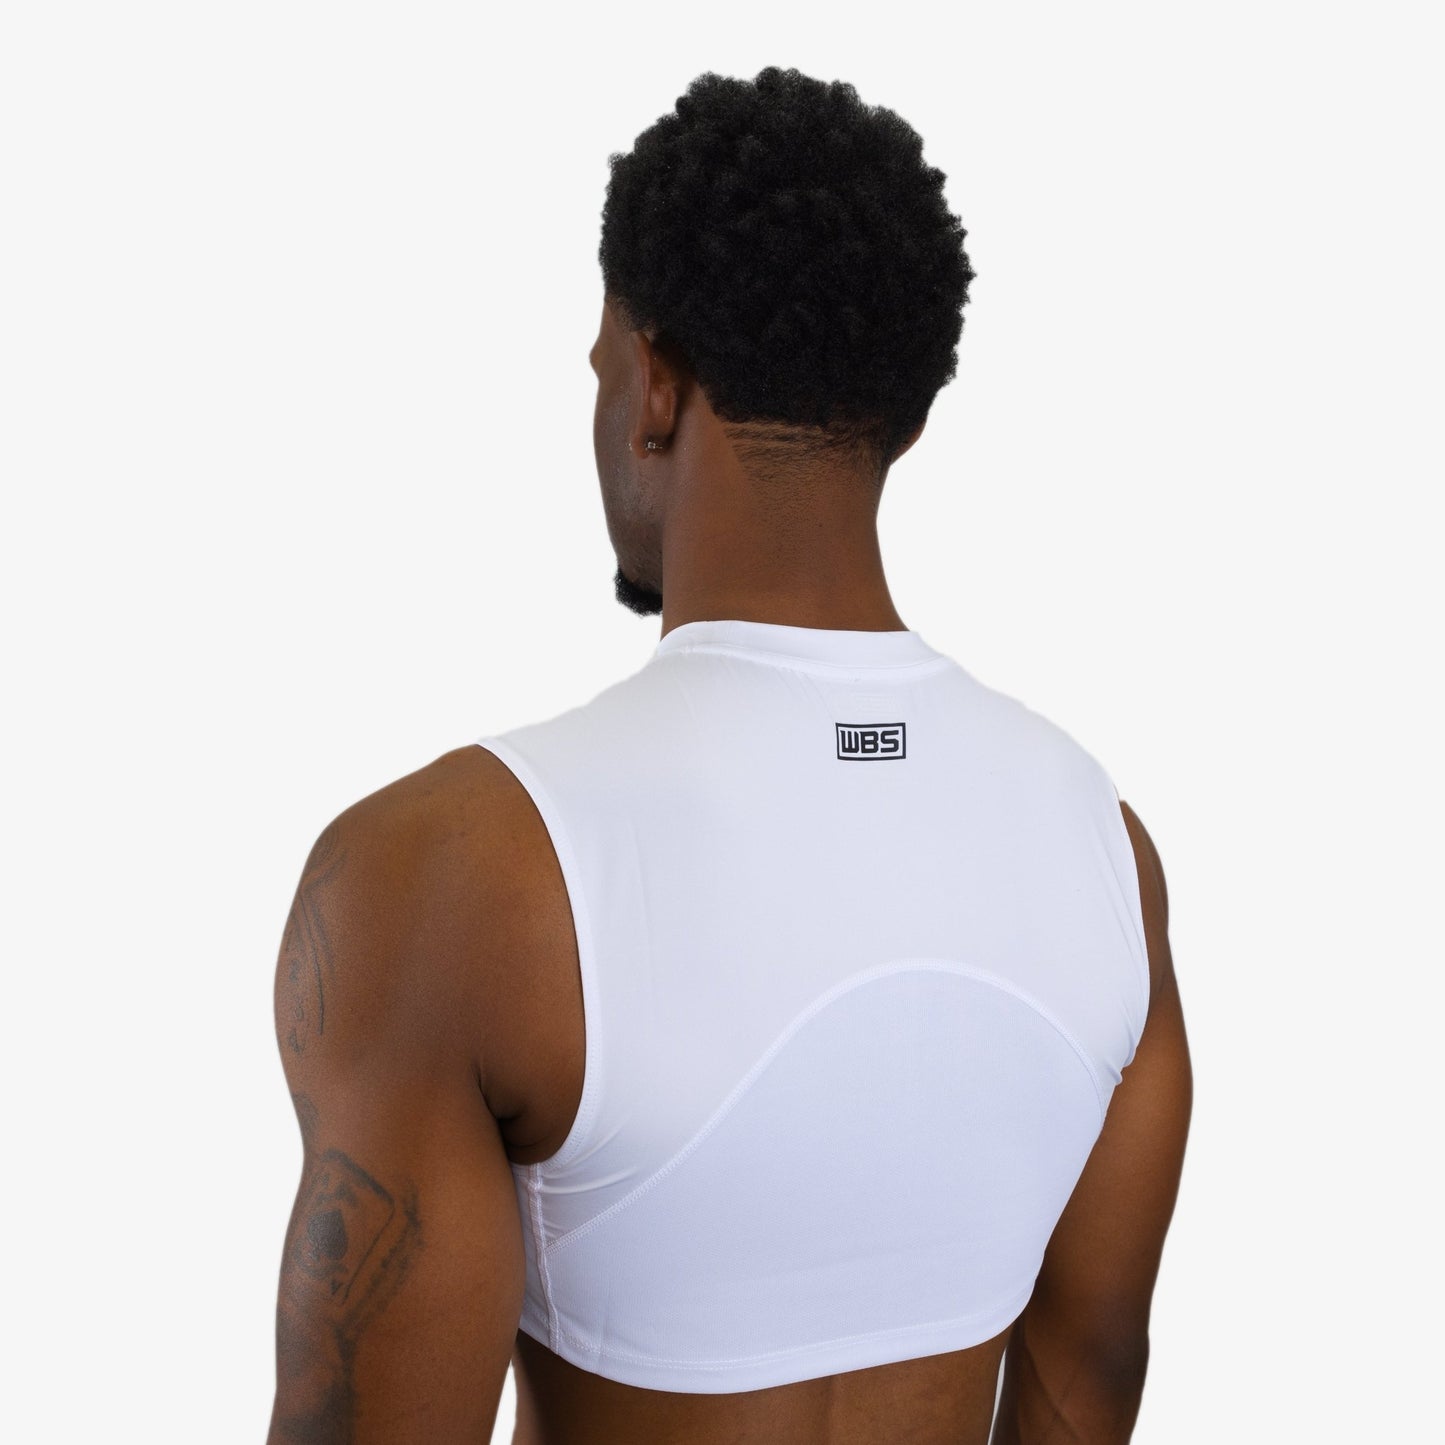 COMPRESSION CROP TANK TOP (WHITE) - We Ball Sports